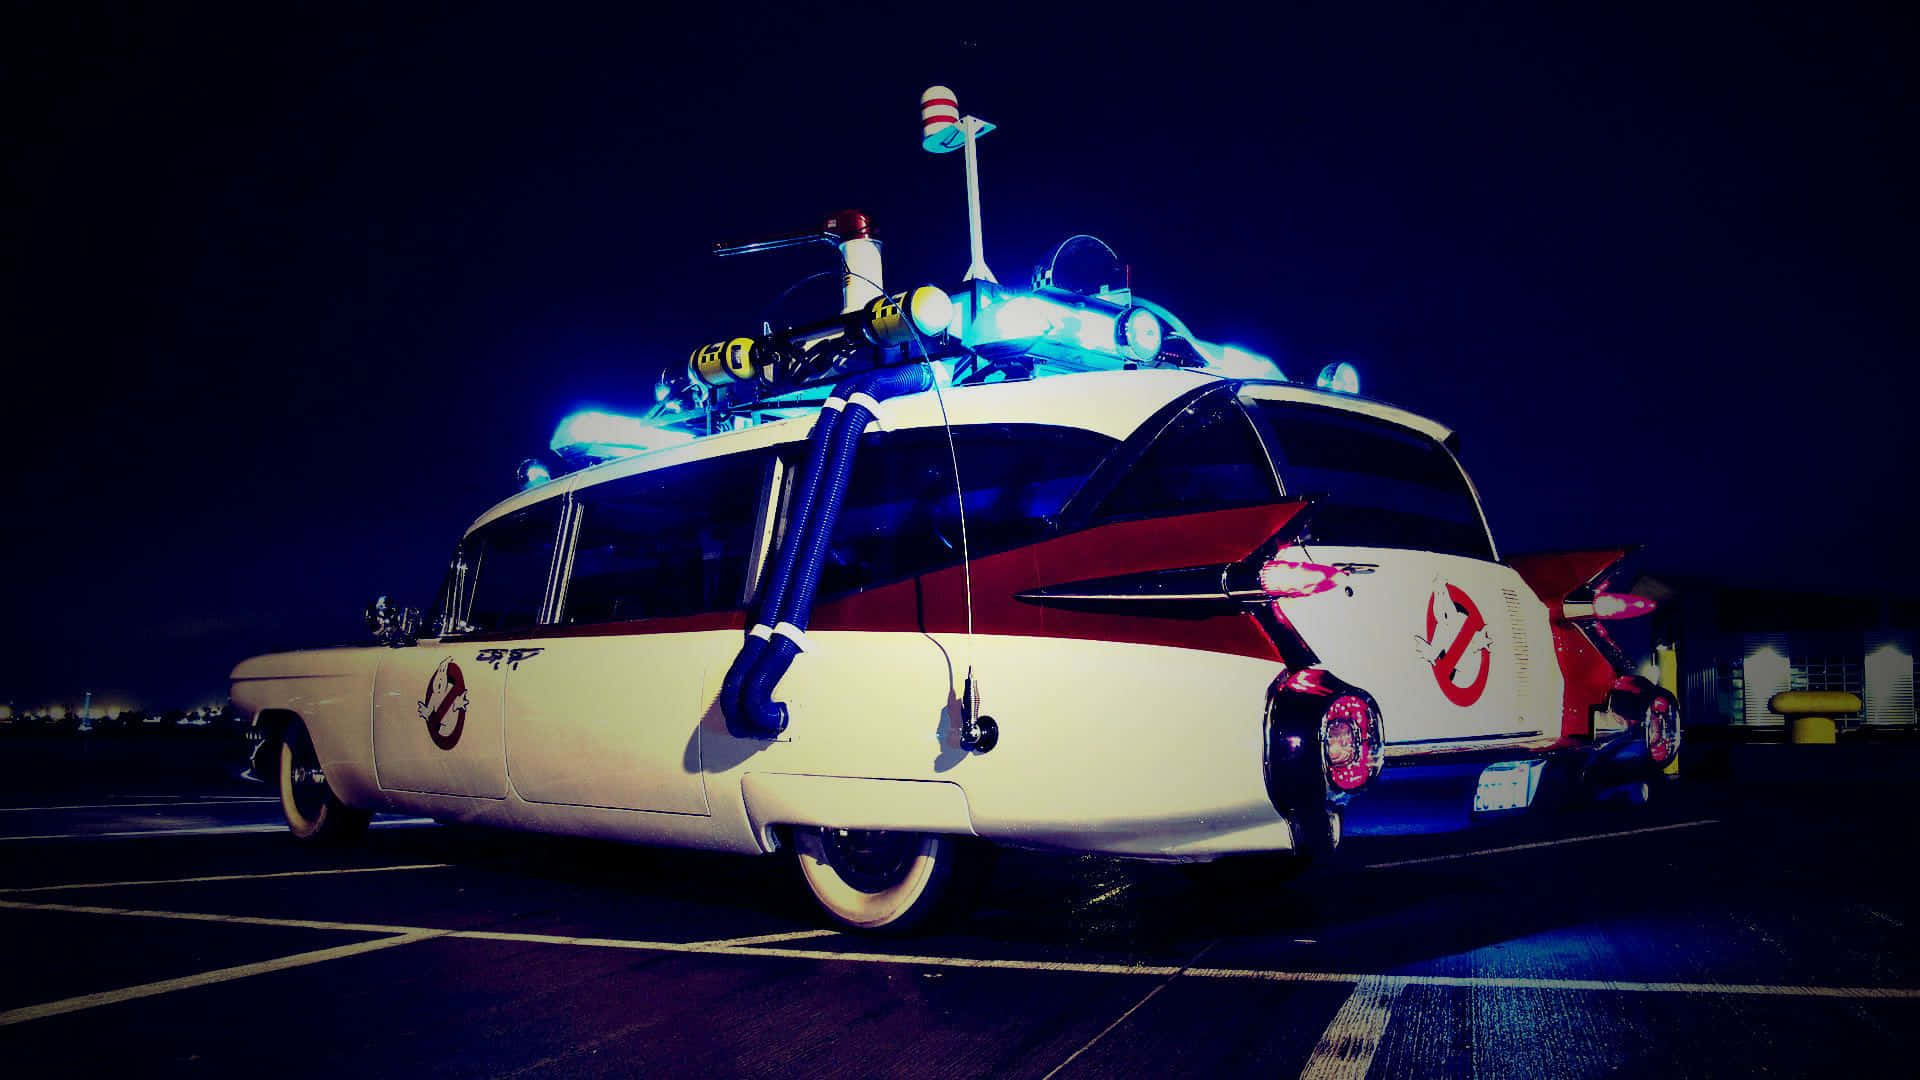 Ghostbusters to the Rescue!